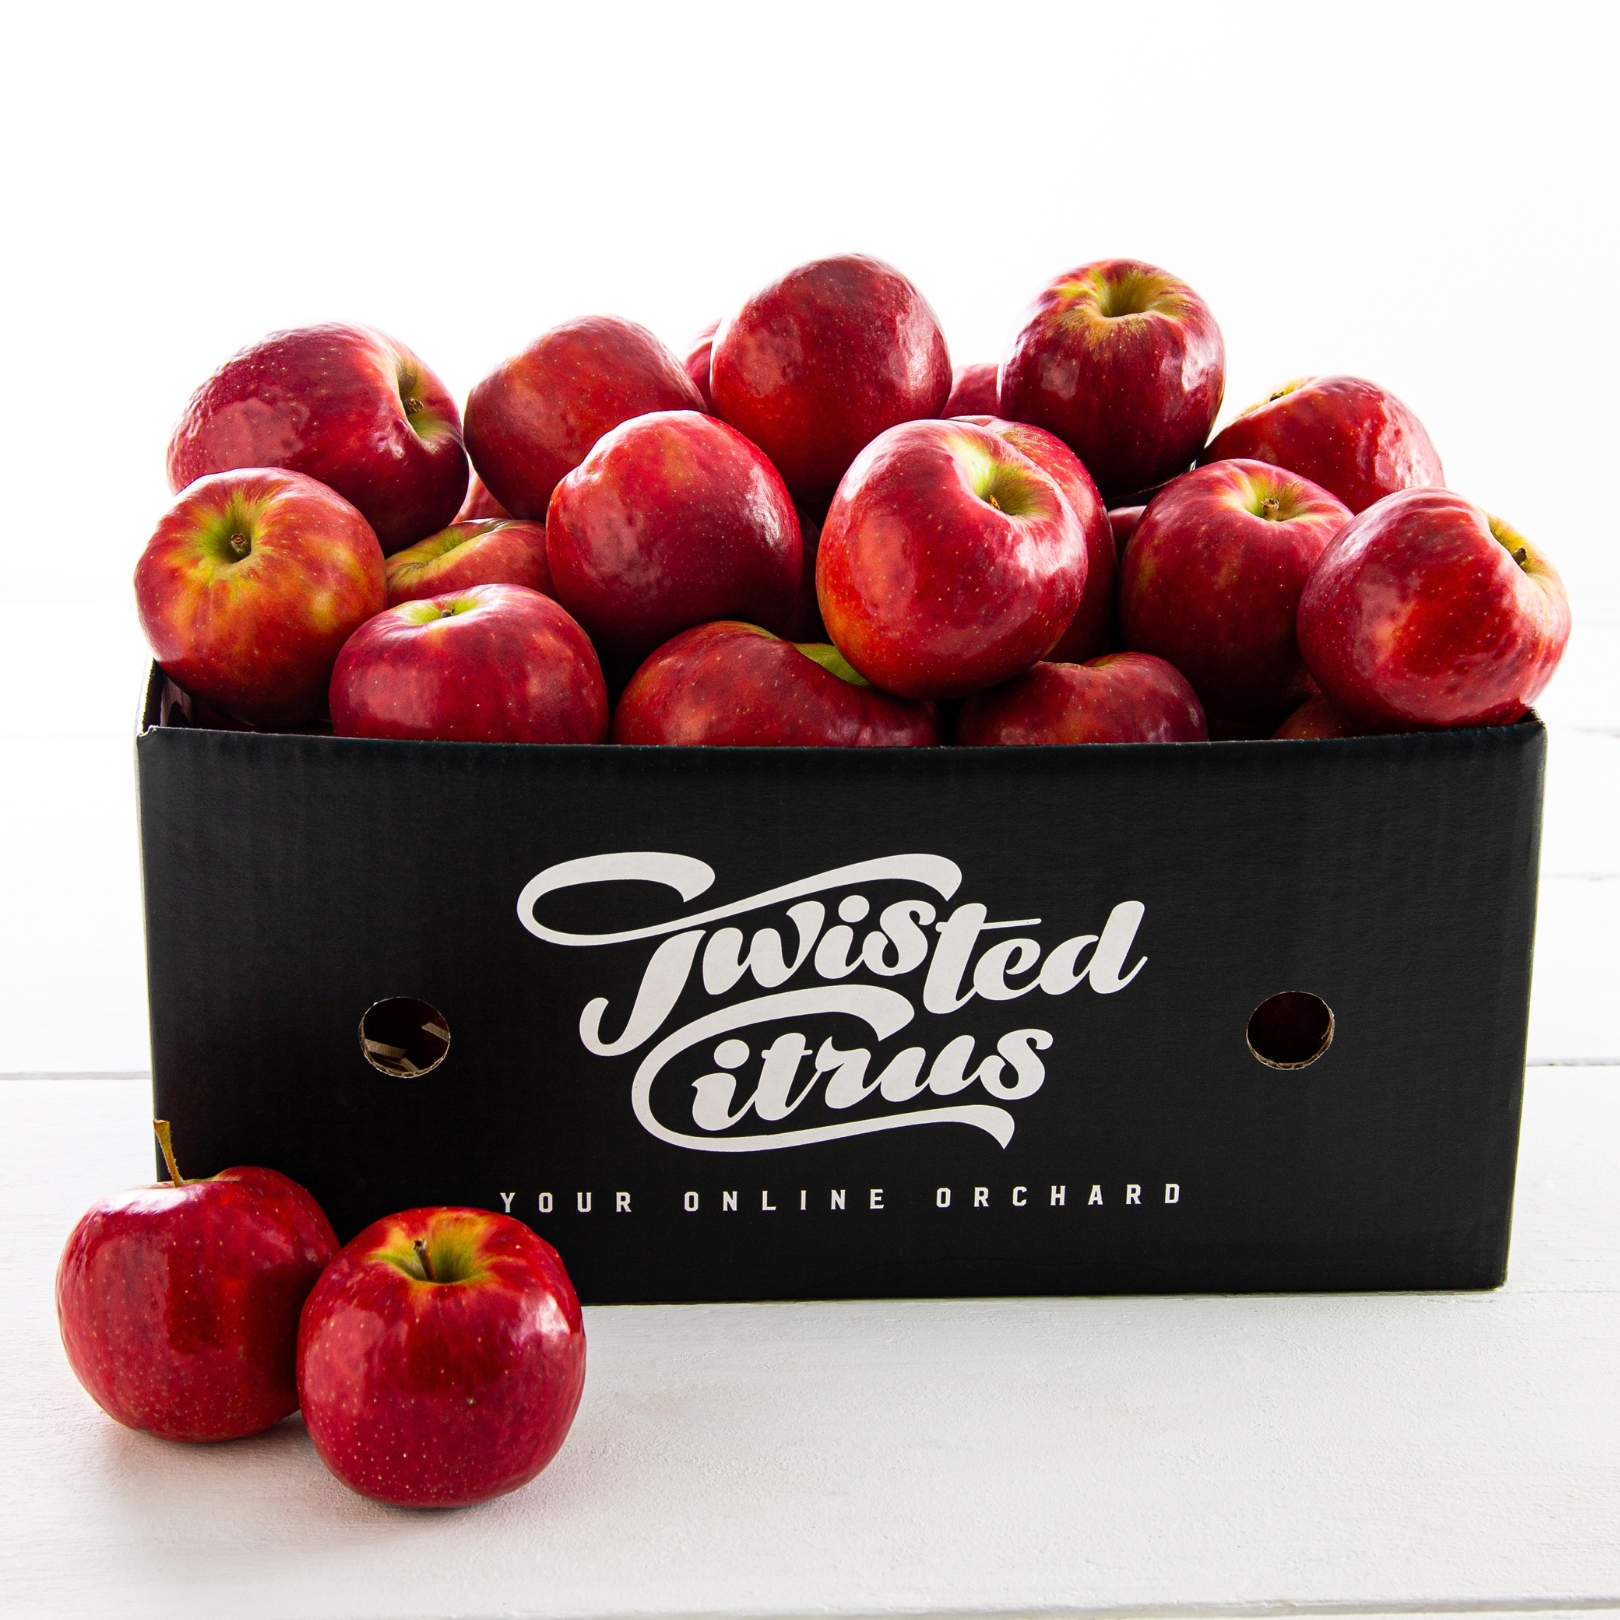 Apples - Pink Lady fruit box delivery nz